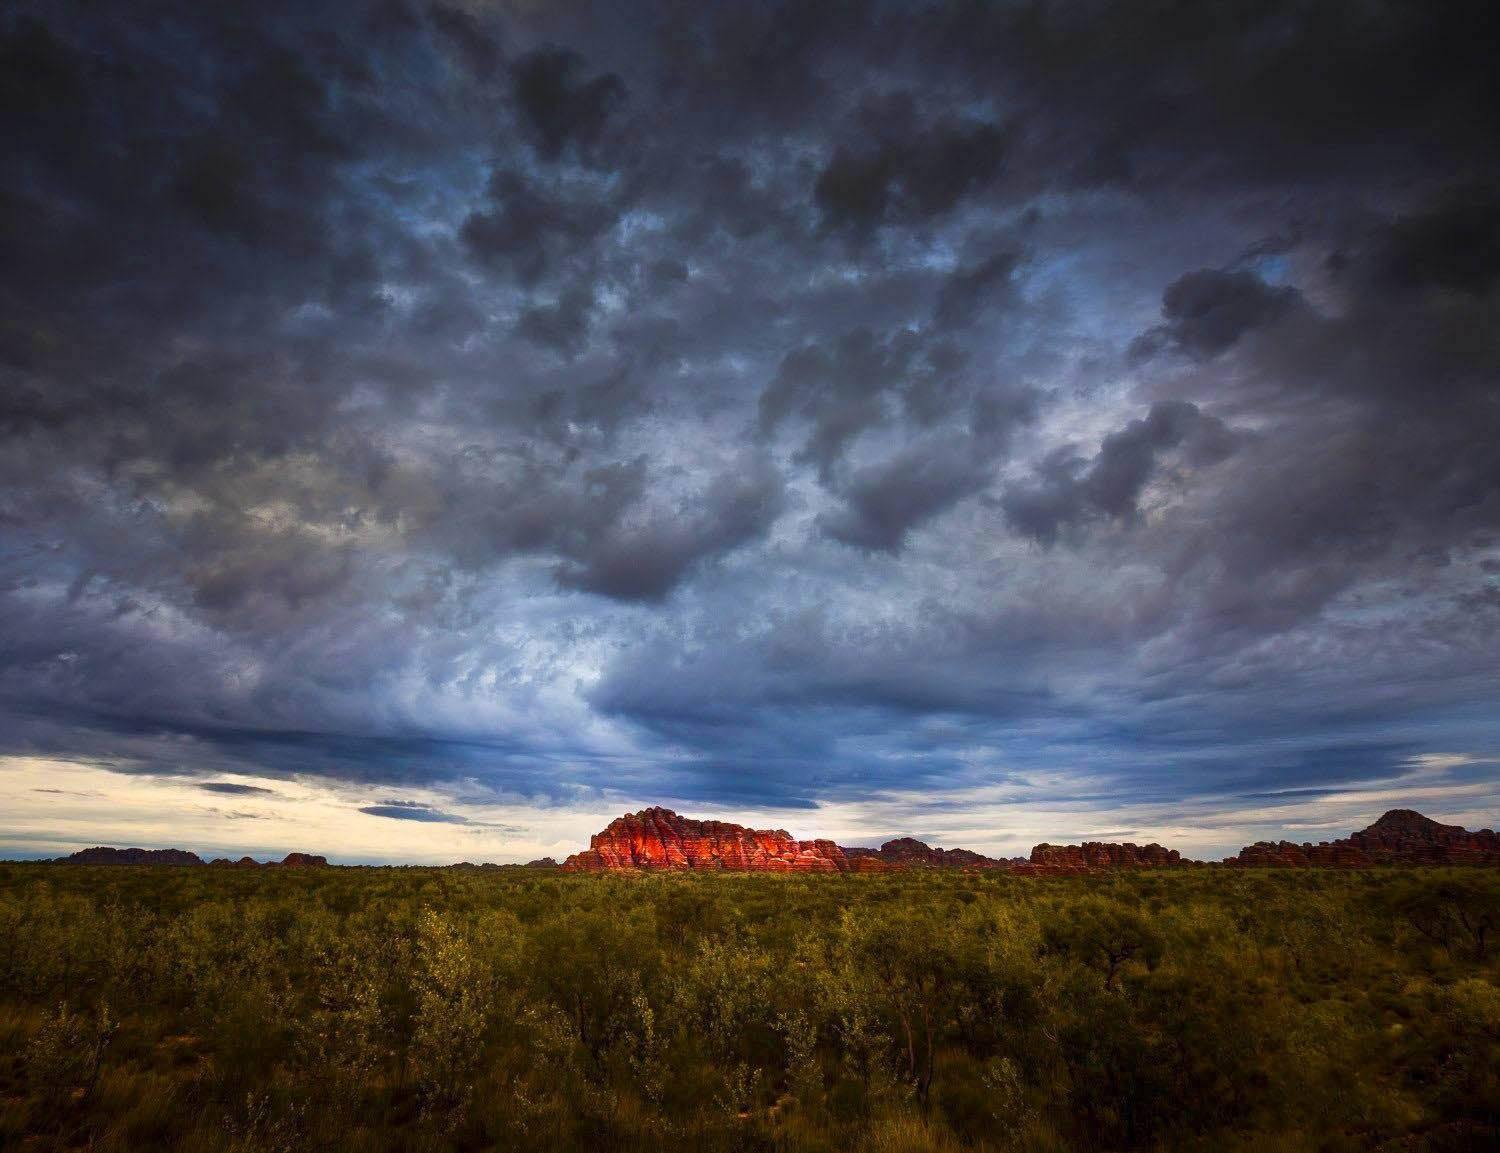 The great mountain wall with a giant black dense cloud over it, and a lush green field in the foreground, Bungle Bungle Storm - Purnululu Bungle Bungles